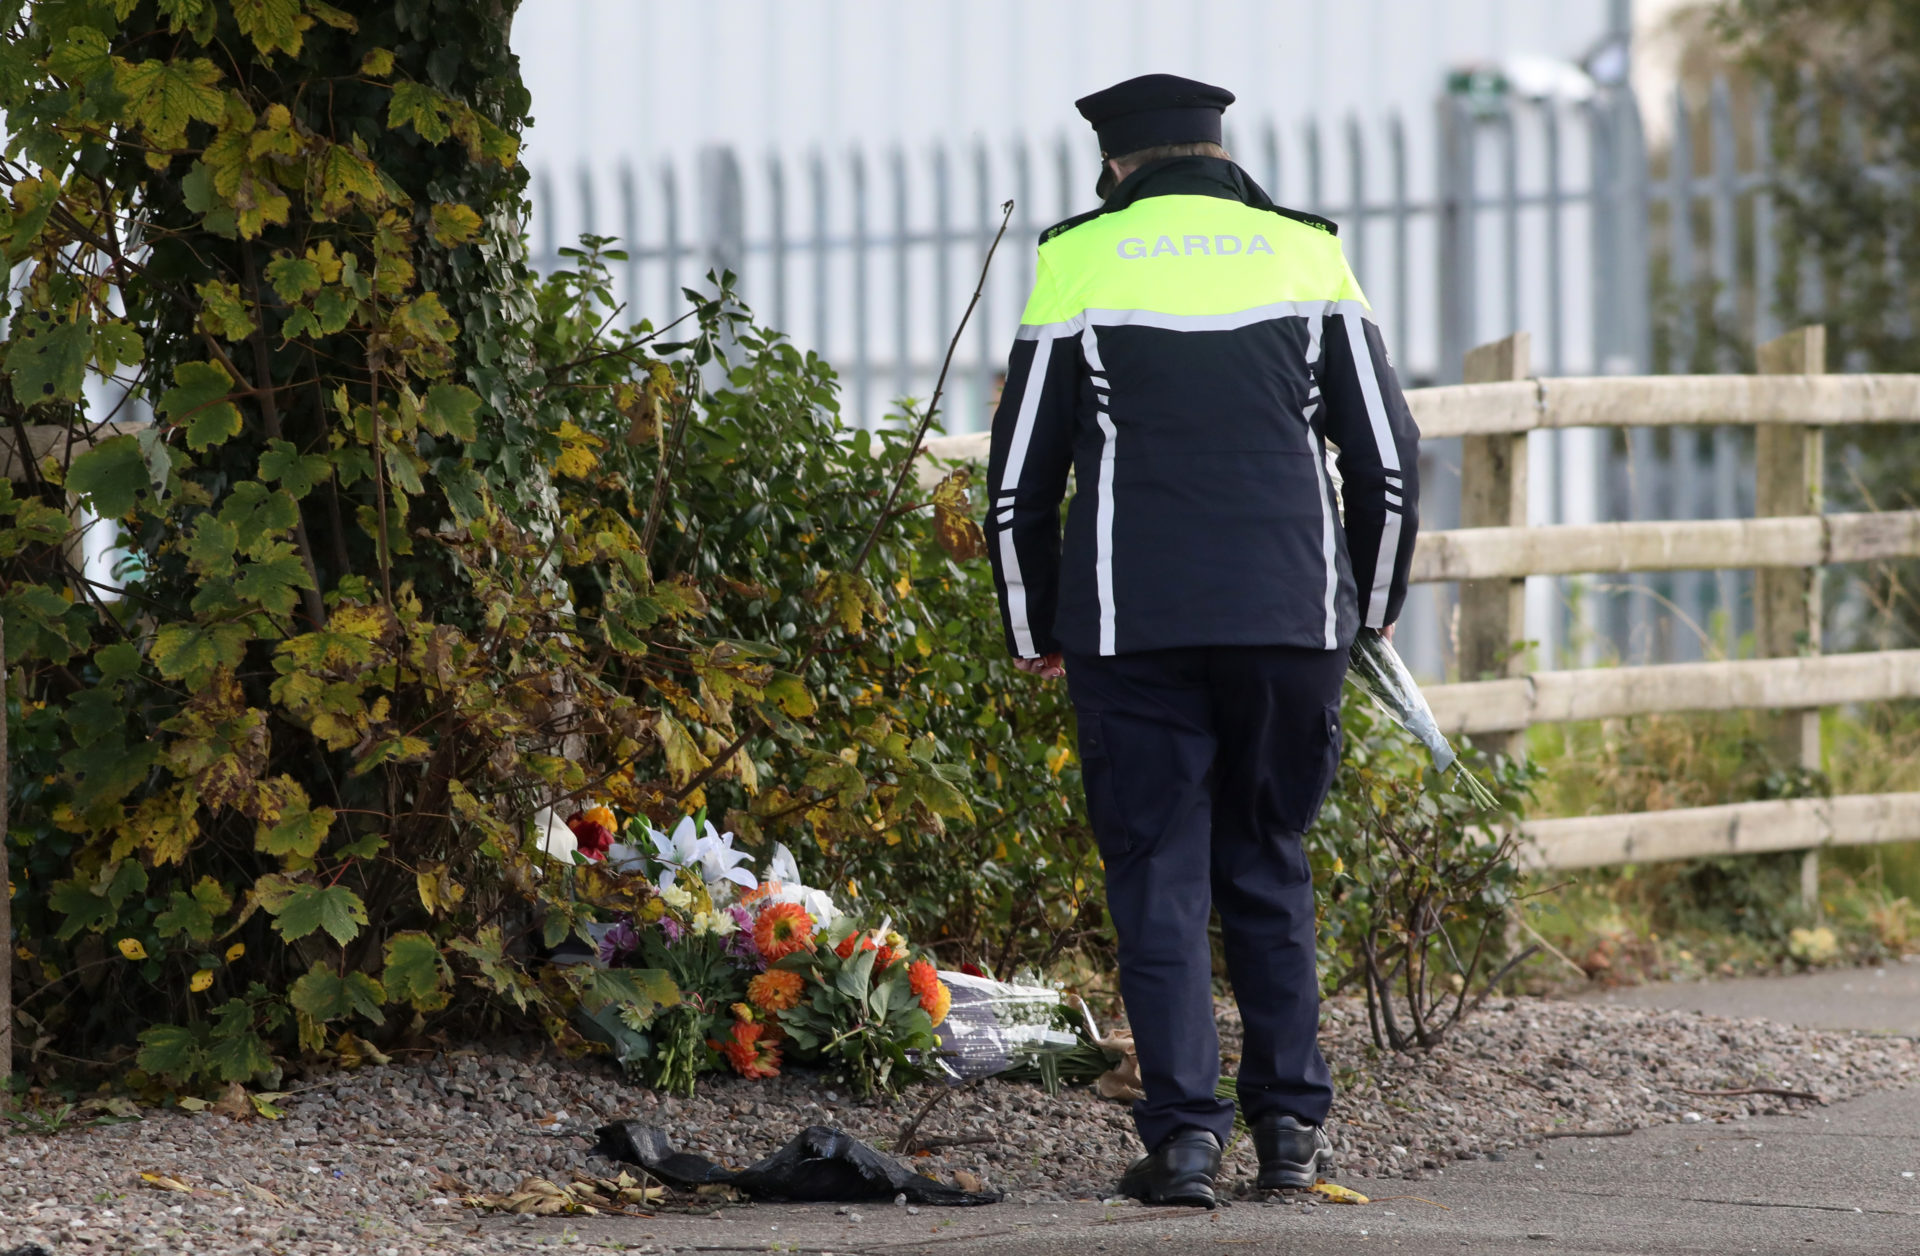 A Garda leaves flowers at the scene of the explosion.